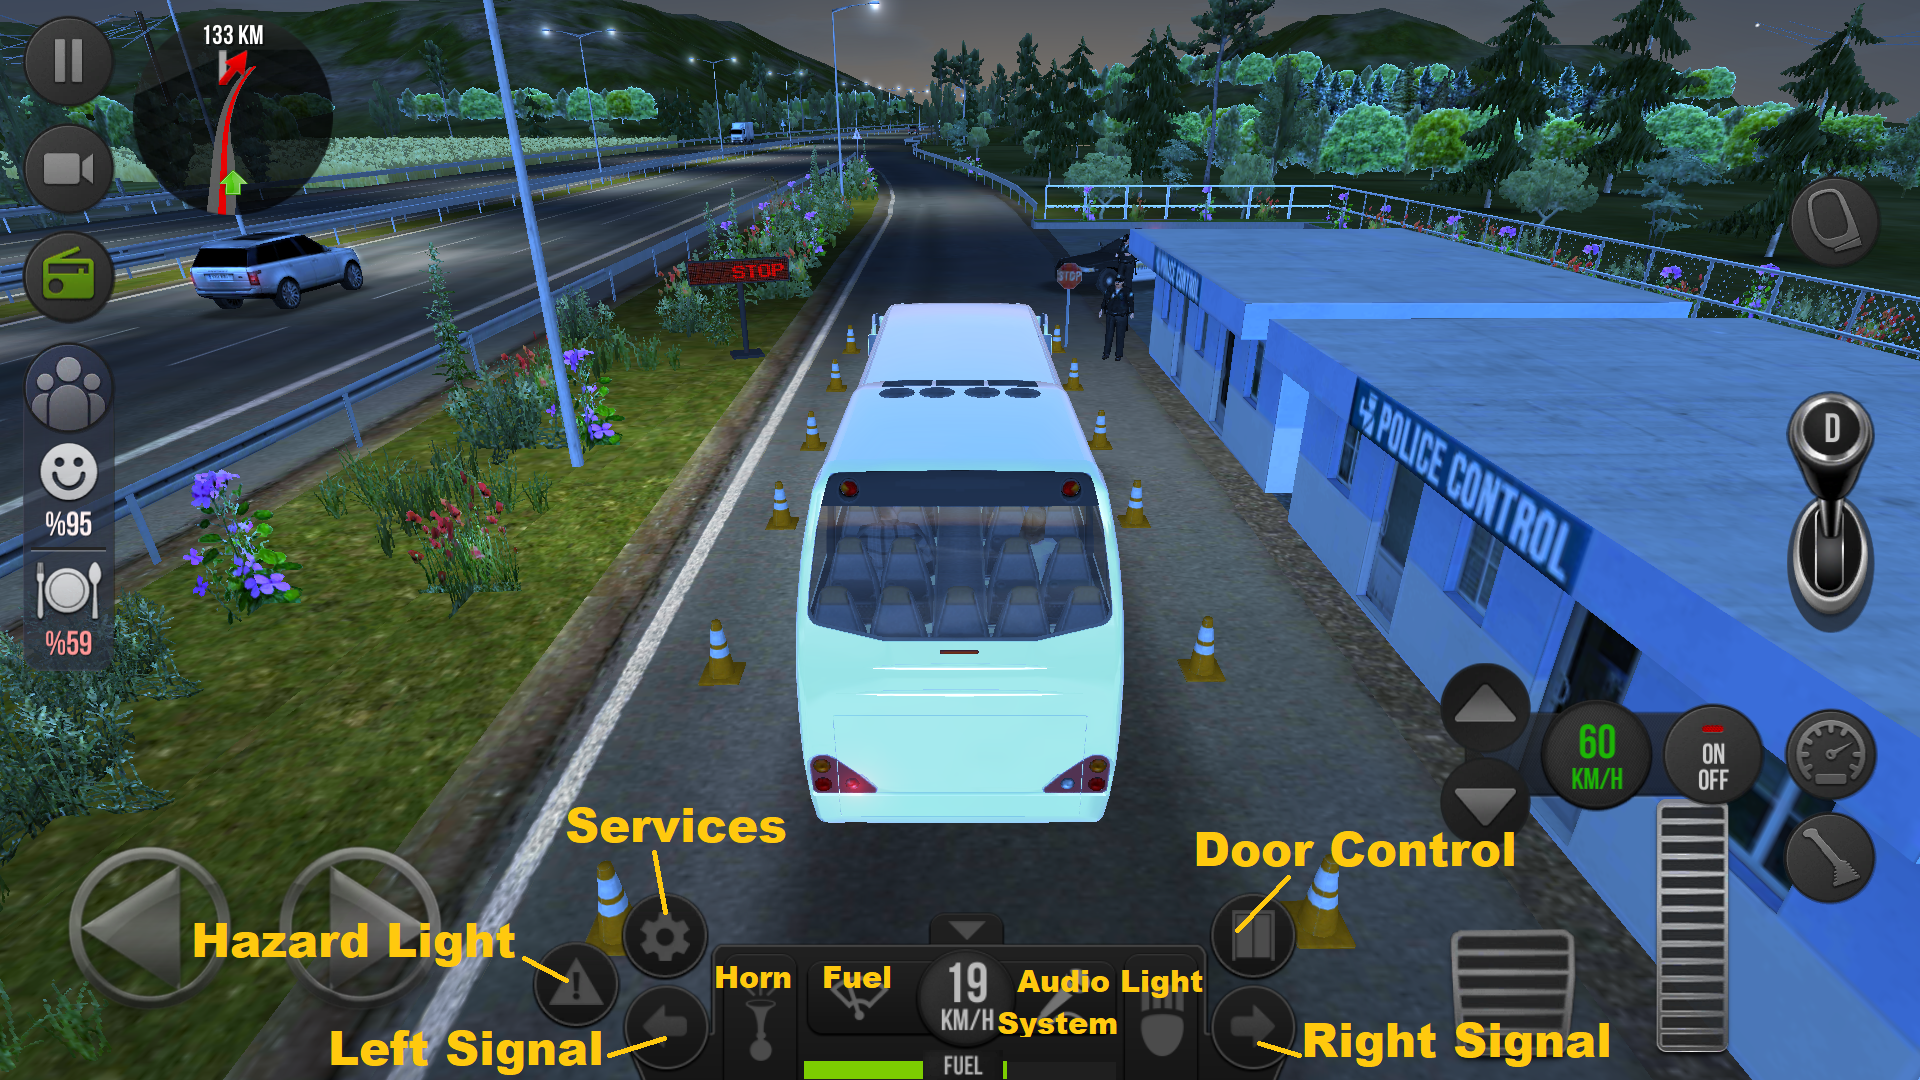 What Are The Buttons Around The Control Panel Bus Simulator Ultimate Guide And Tips - how to be small in bus simulator roblox